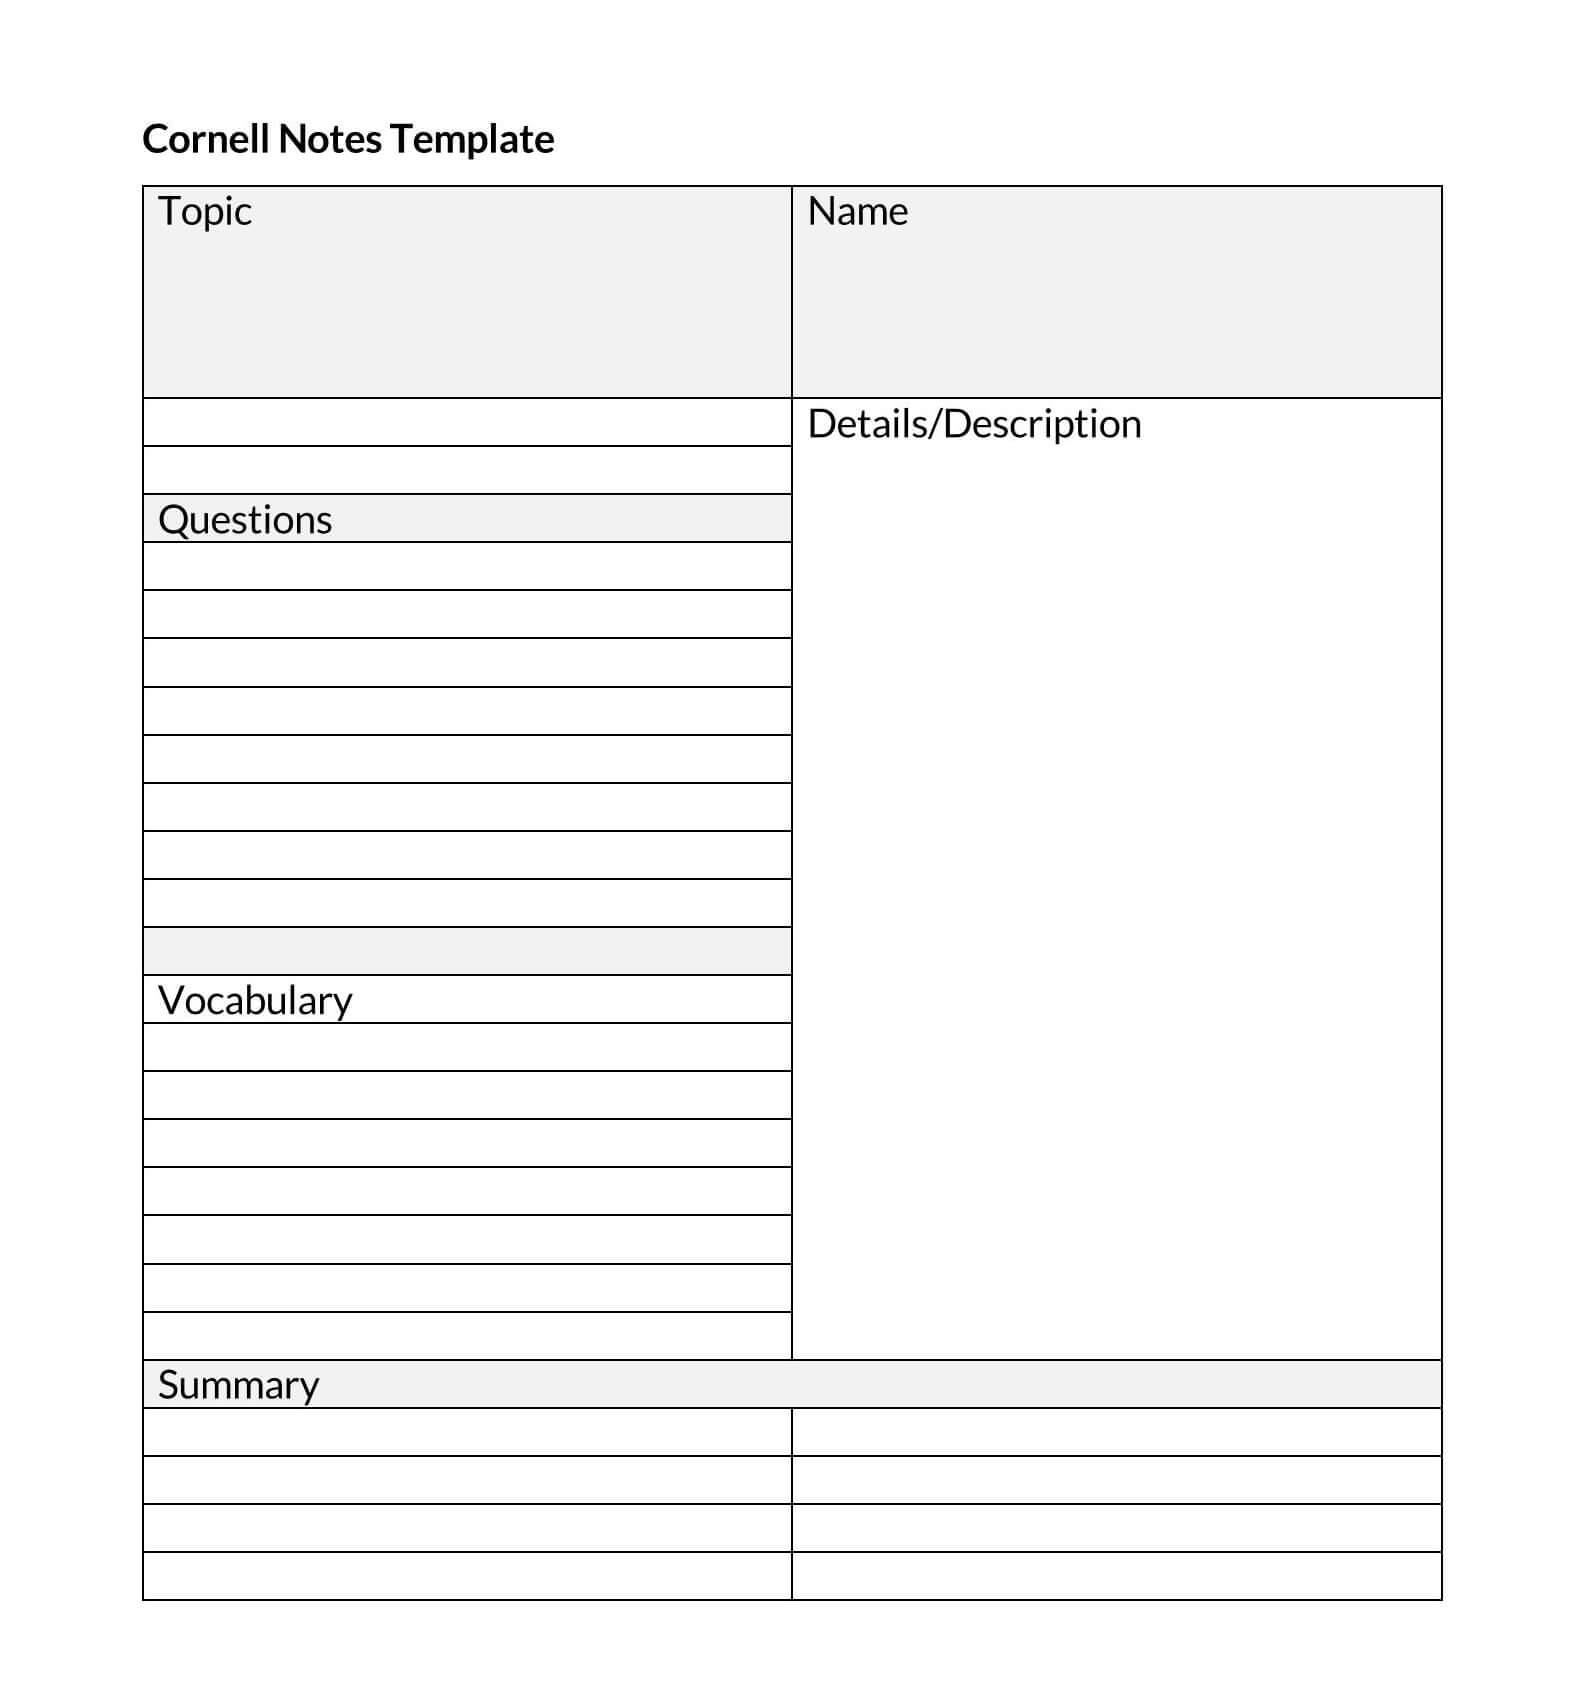 Customizable Cornell Note Template Word